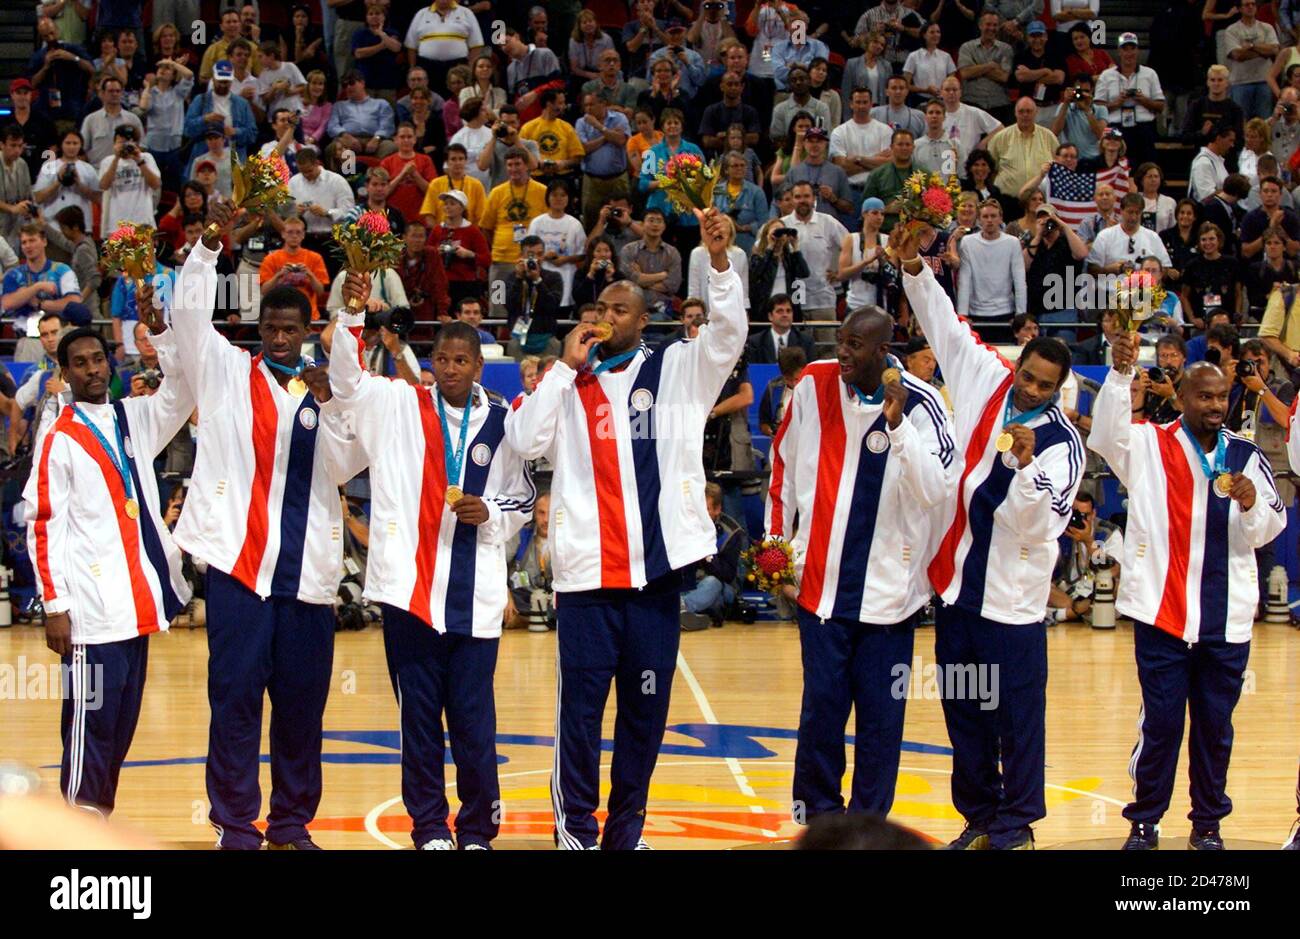 USA basketball players wave on the podium during a presentation ceremony at  the Olympic Games in Sydney, October 1, 2000. USA beat France 85-75 in the  men's final basketball match on Sunday